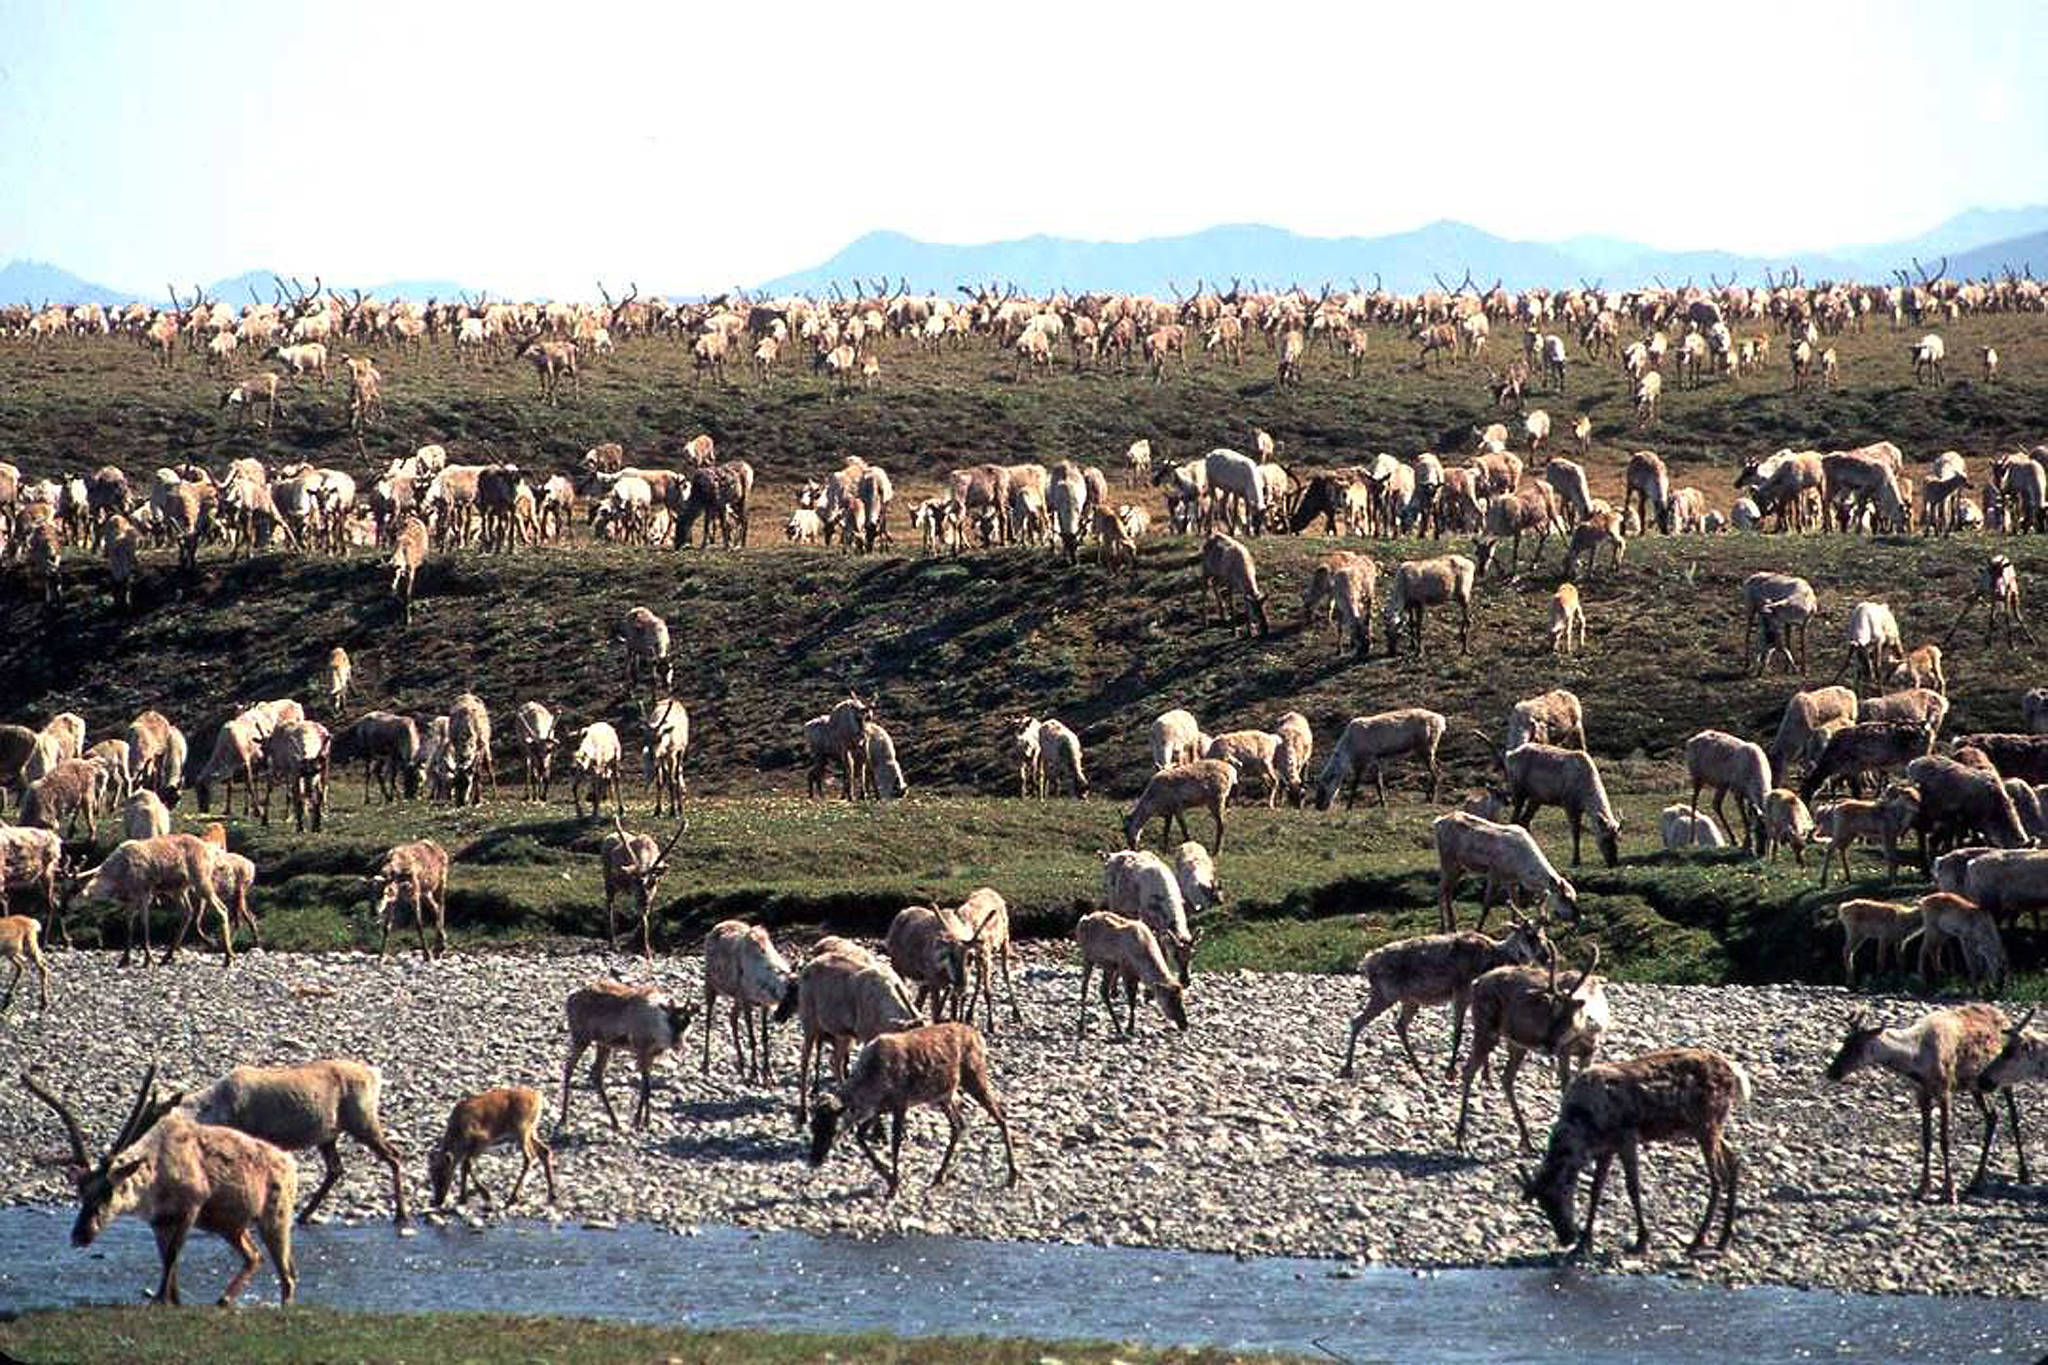 Caribou from the Porcupine Caribou Herd migrate onto the coastal plain of the Arctic National Wildlife Refuge in northeast Alaska. Environmental groups wasted no time challenging the Trump administration’s attempt to open part of an Alaska refuge where polar bears and caribou roam free to oil and gas drilling. (U.S. Fish and Wildlife Service)